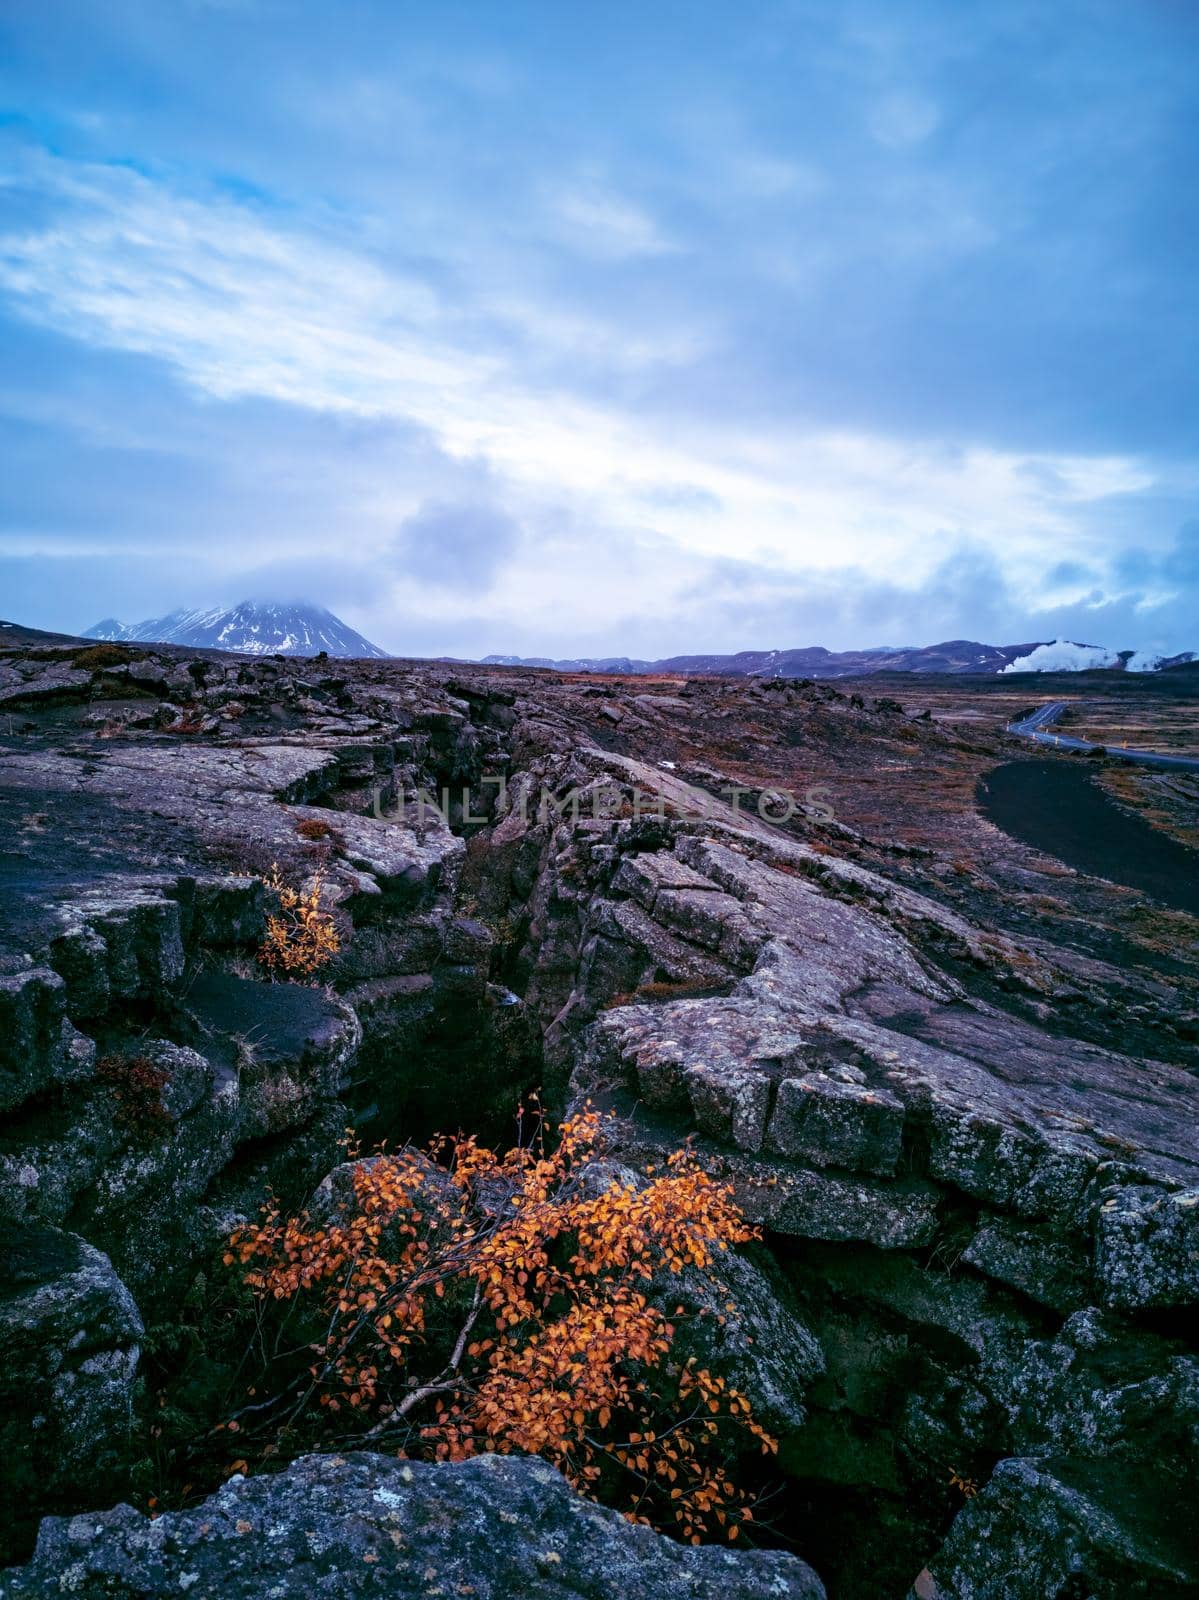 Massive crack in the lava fields under cloudy day by FerradalFCG